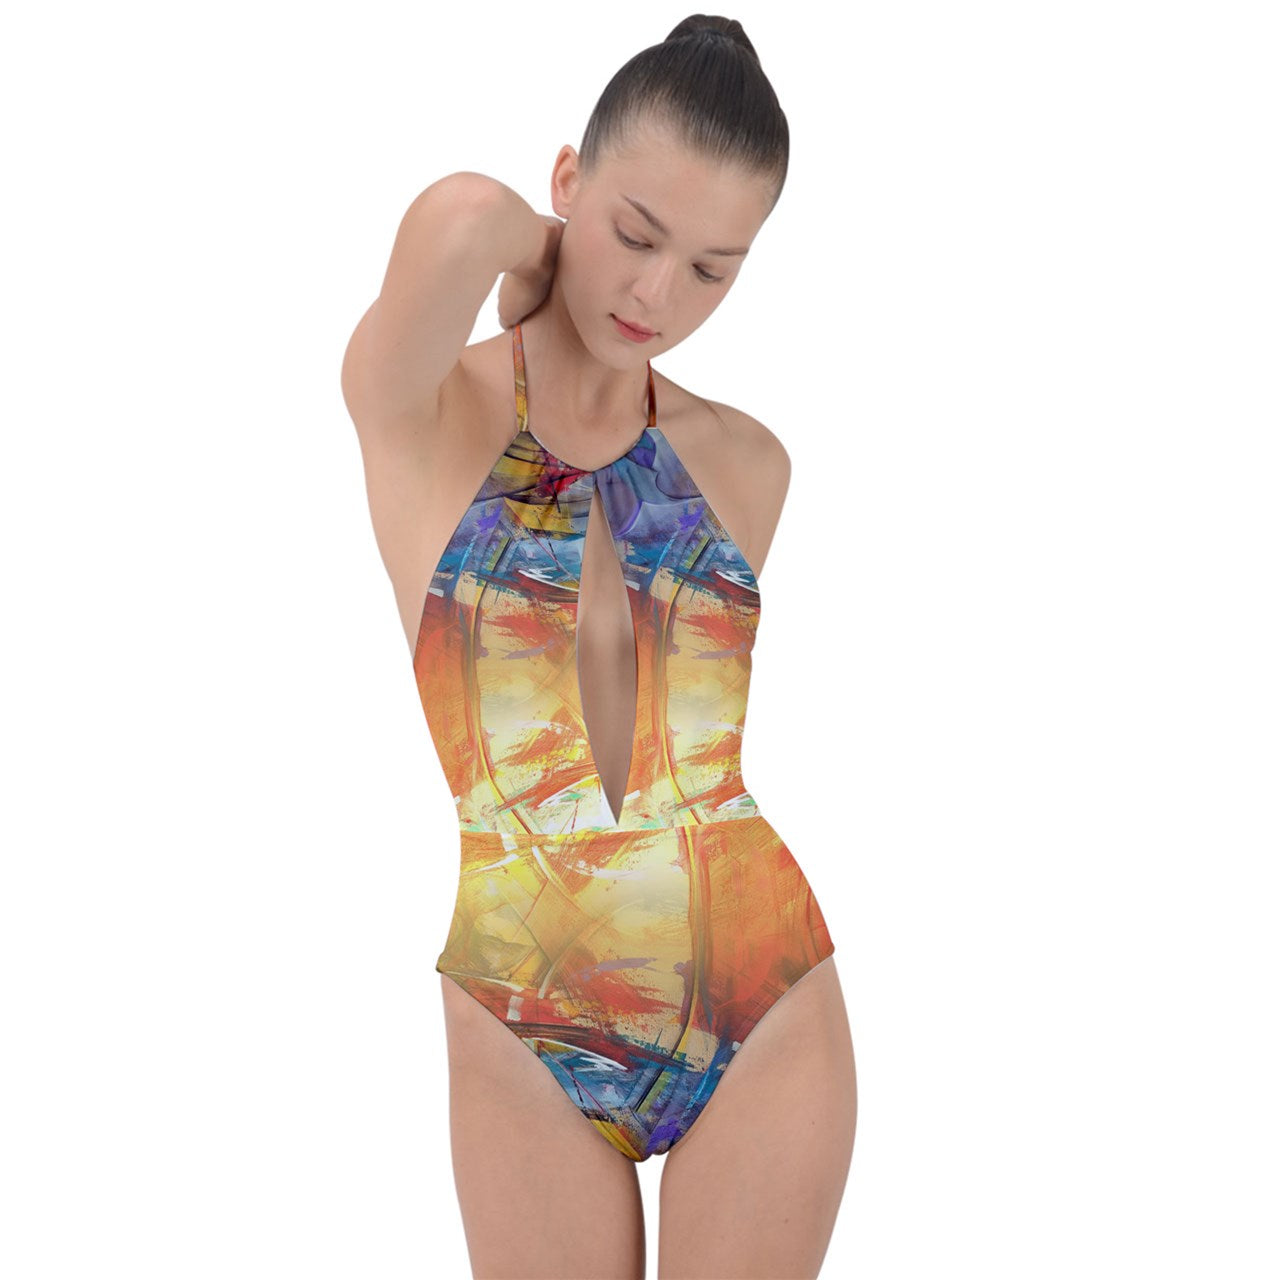 Diving swimsuit "Laboukan"